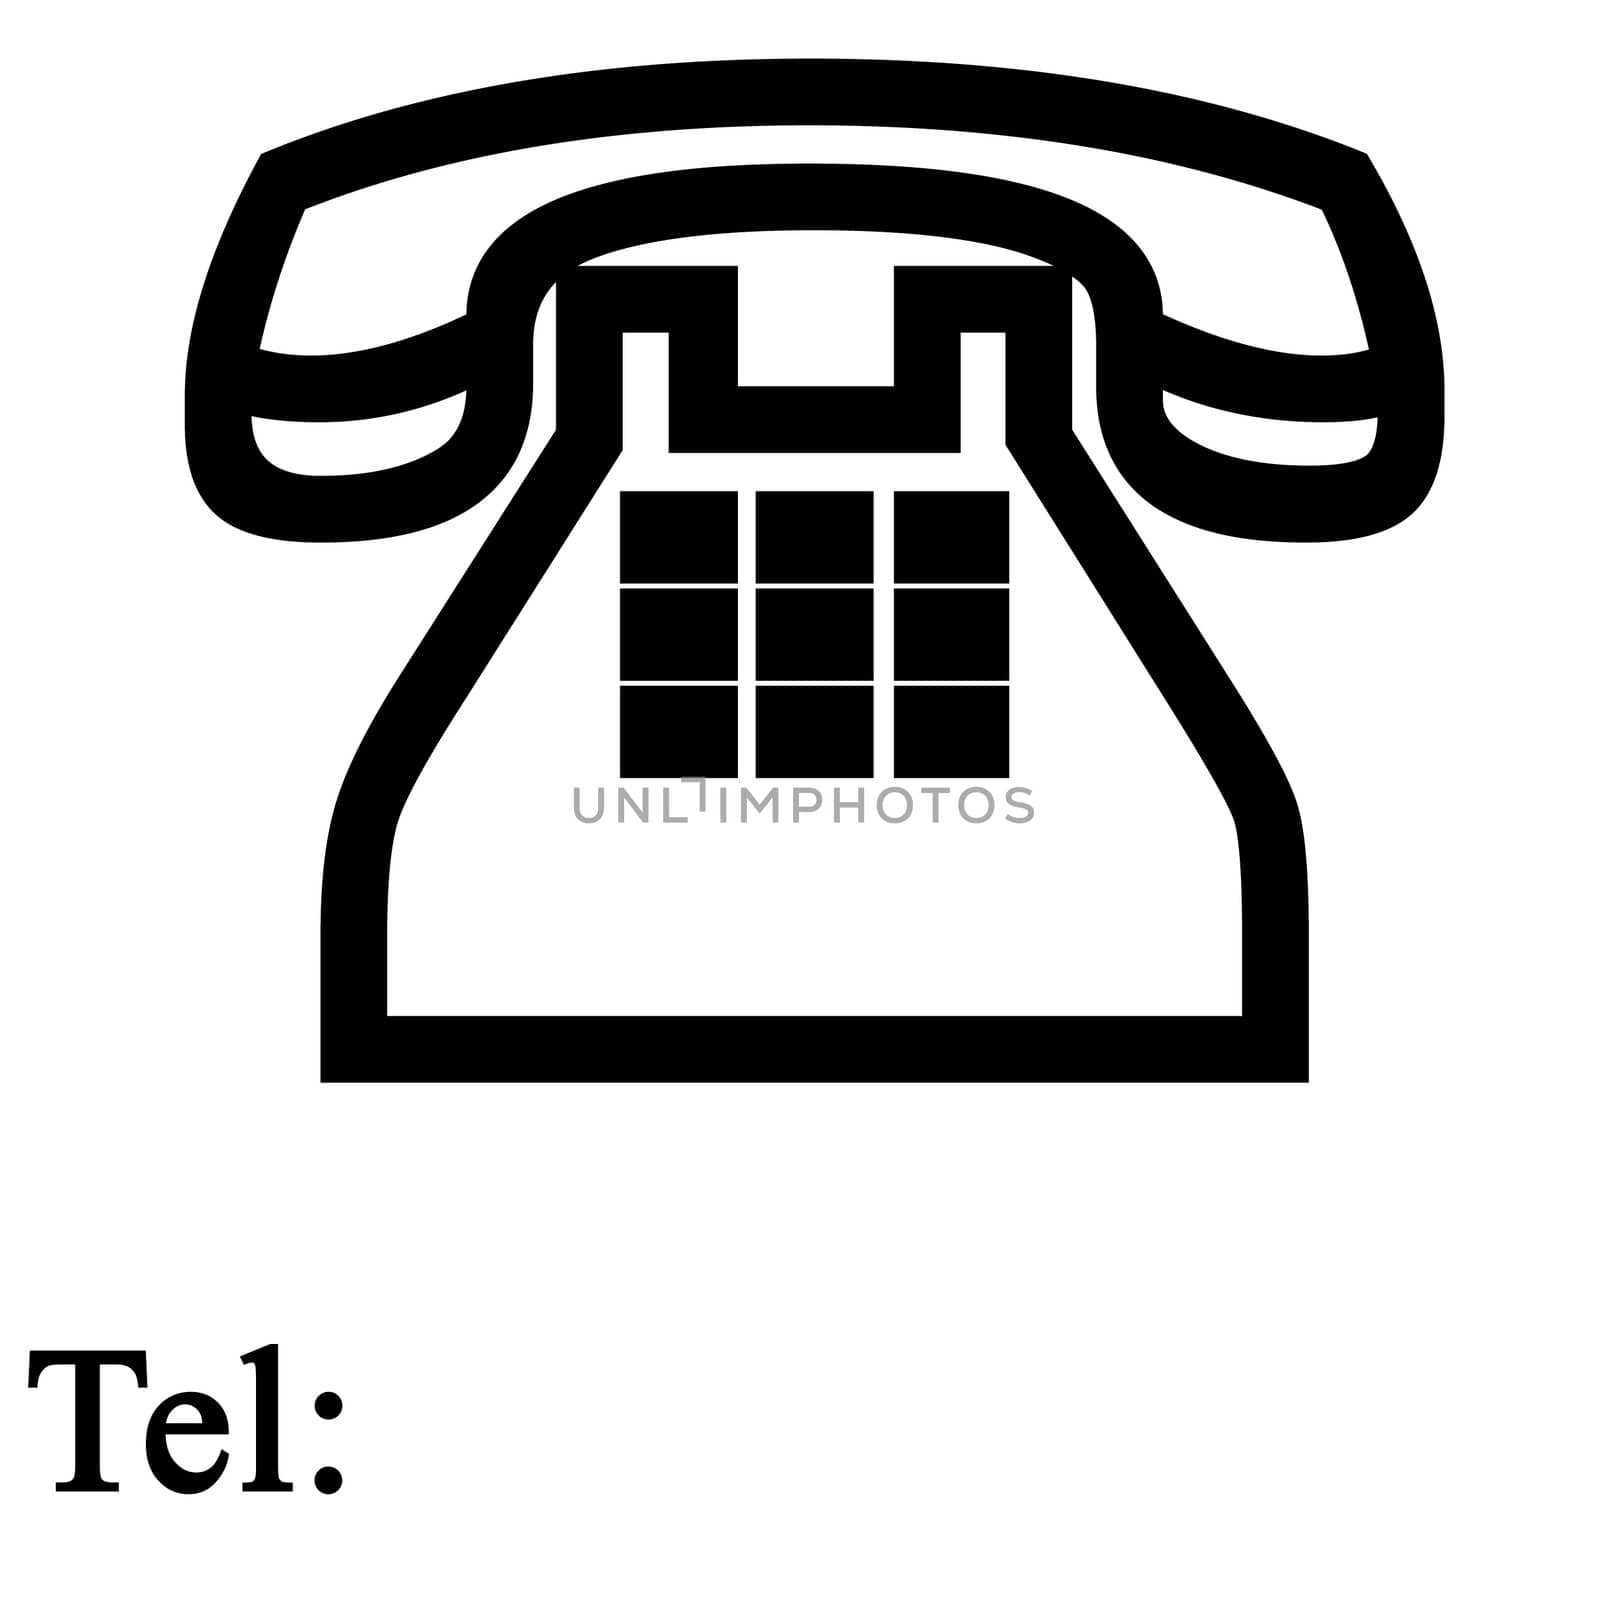 Telephone with space for number